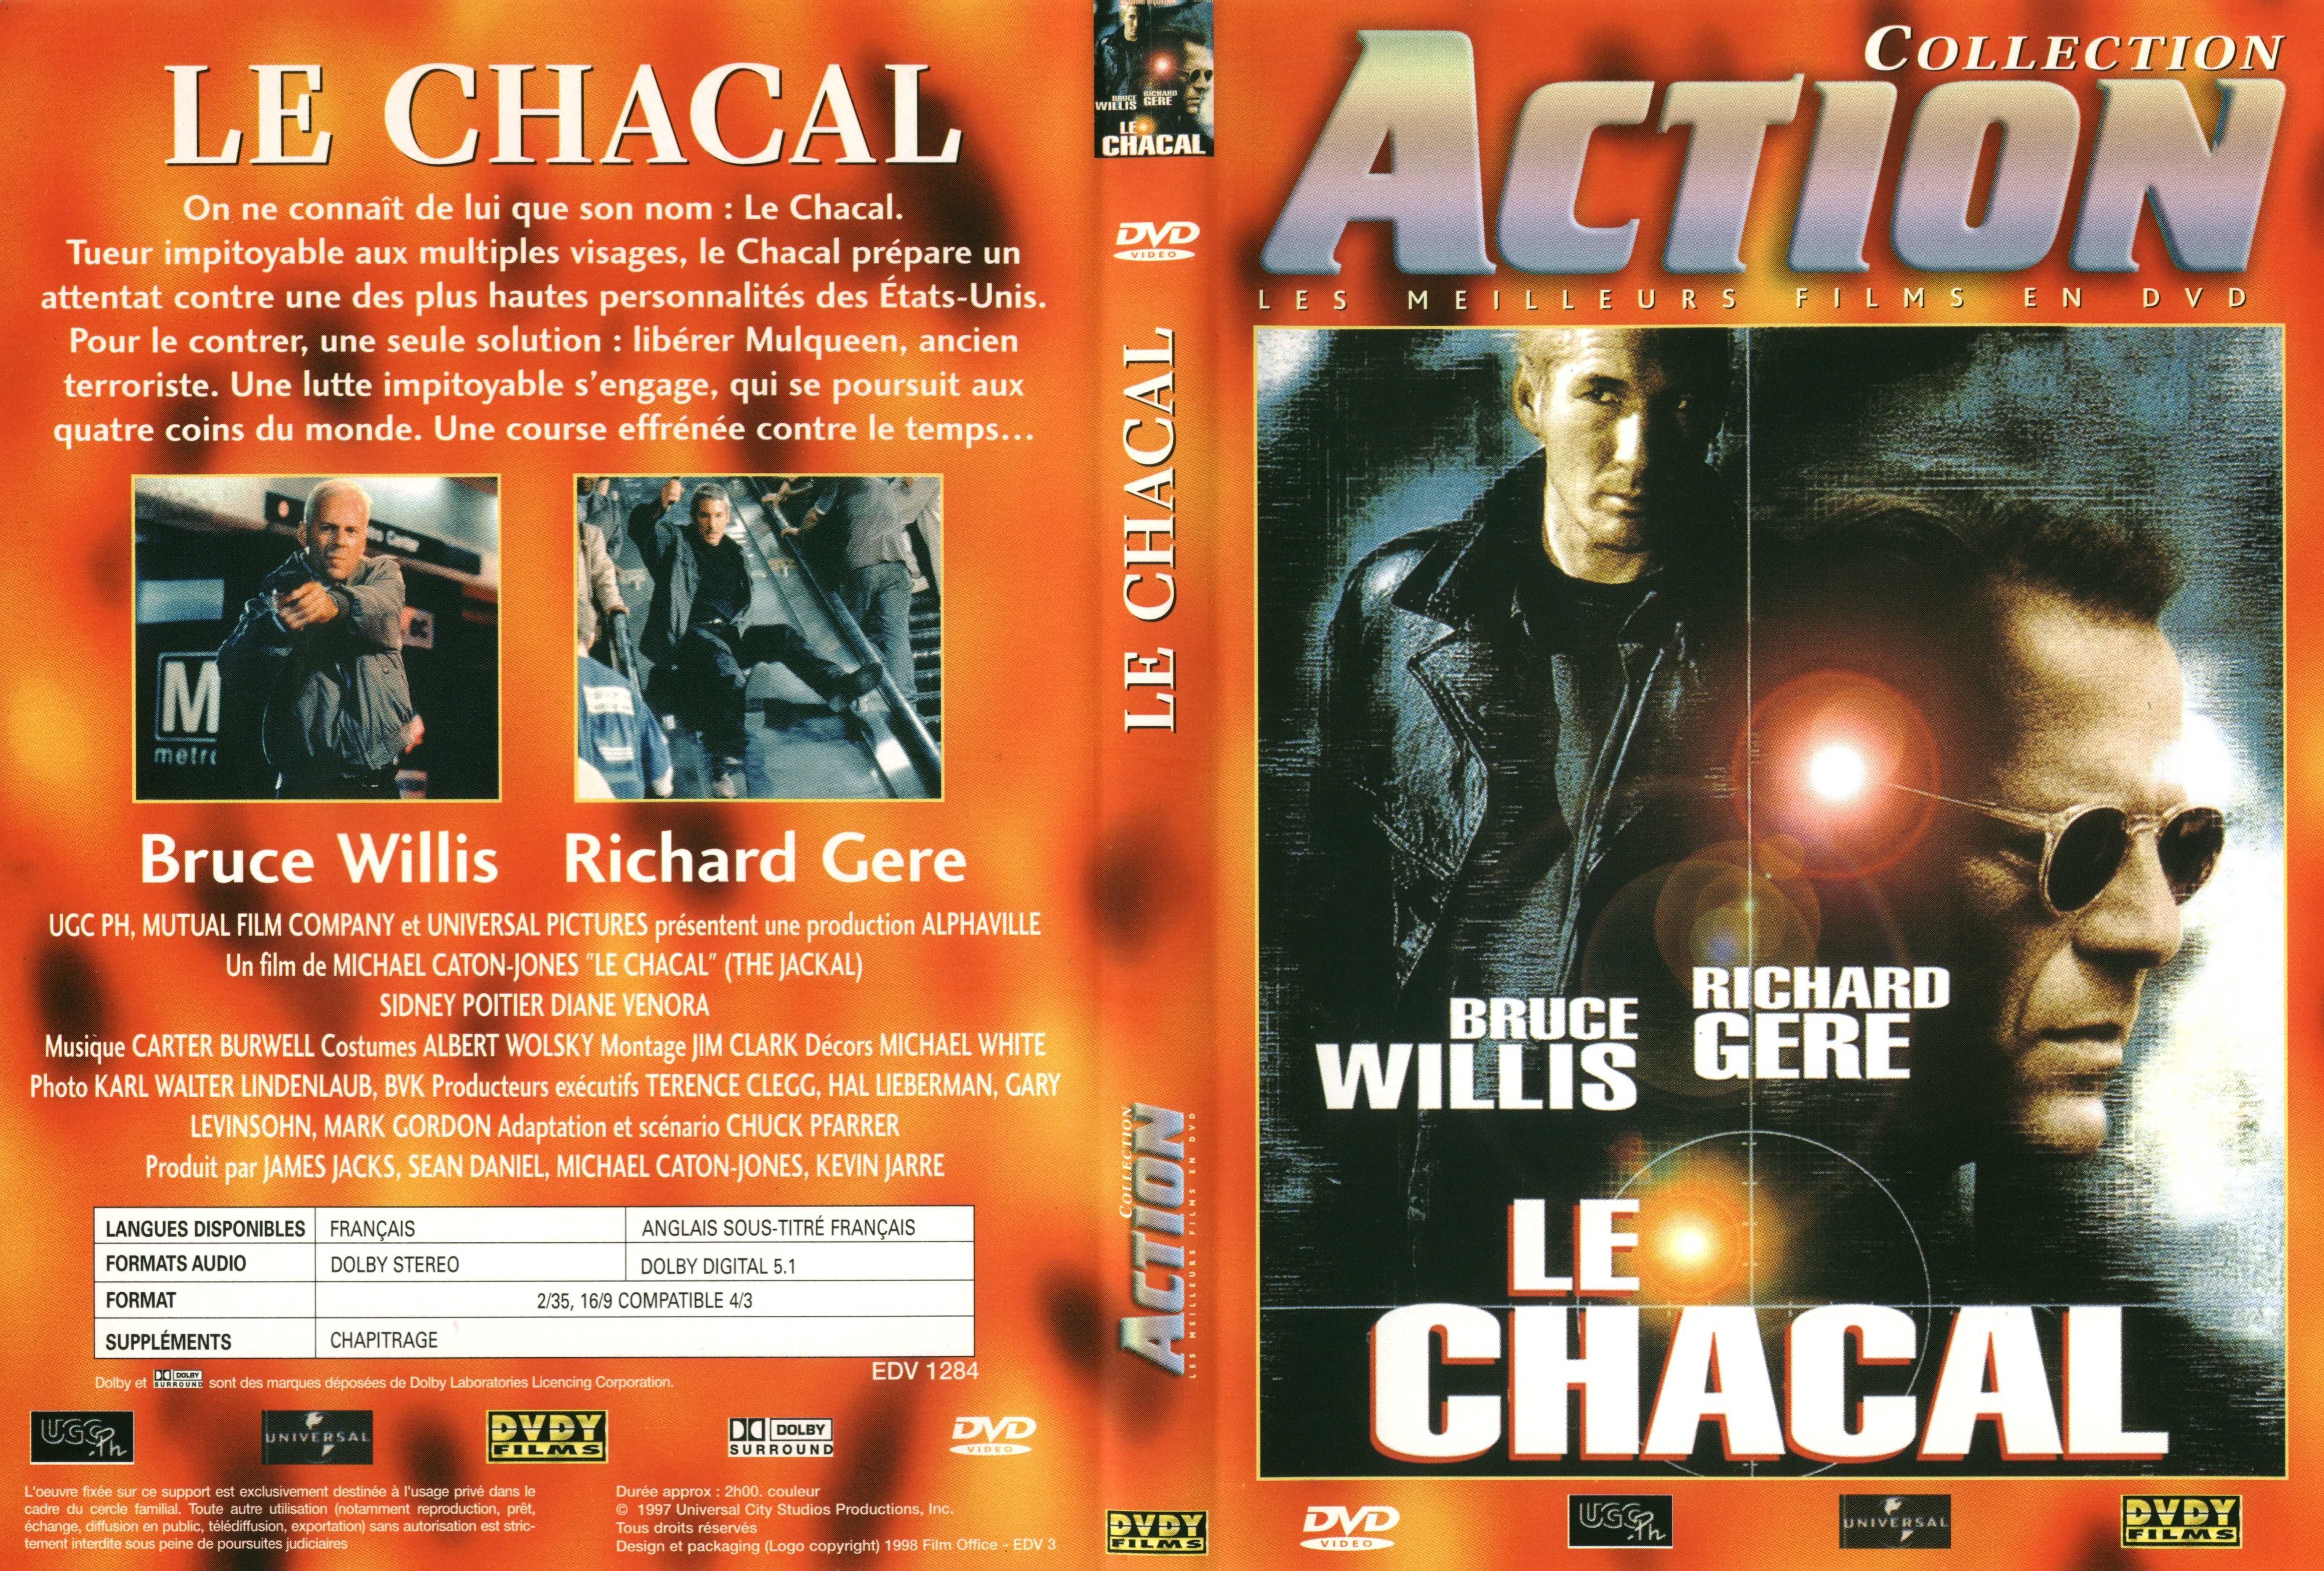 Jaquette DVD Le chacal v2